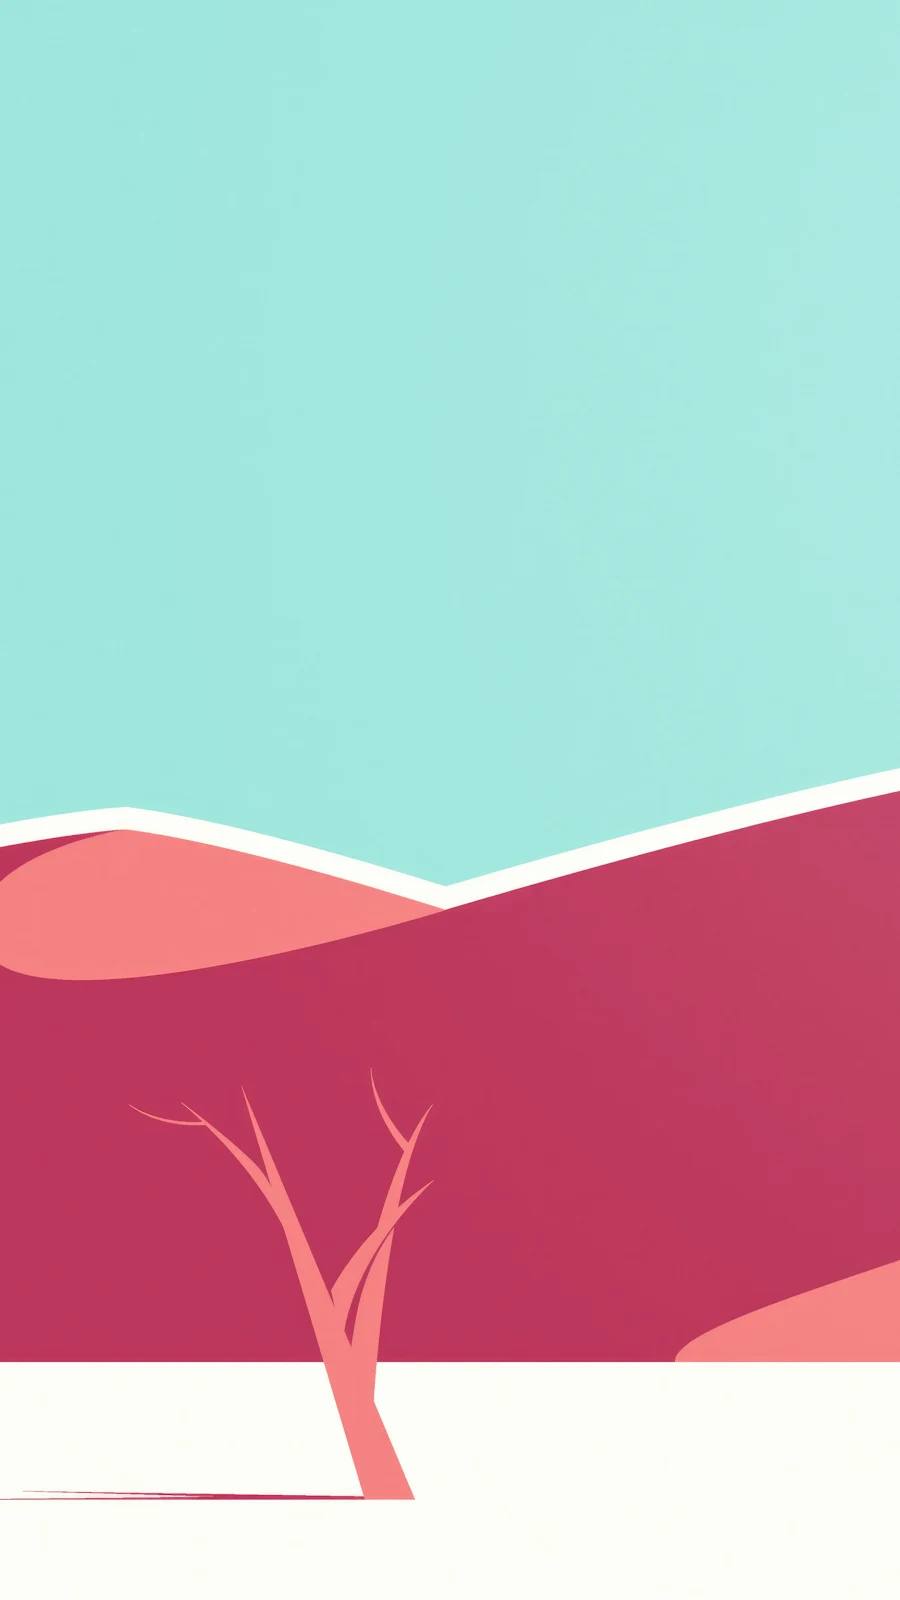 A Cool Desert Dunes Minimal 4K  iPhone Wallpaper for Free Download in High Quality [2160x3840]